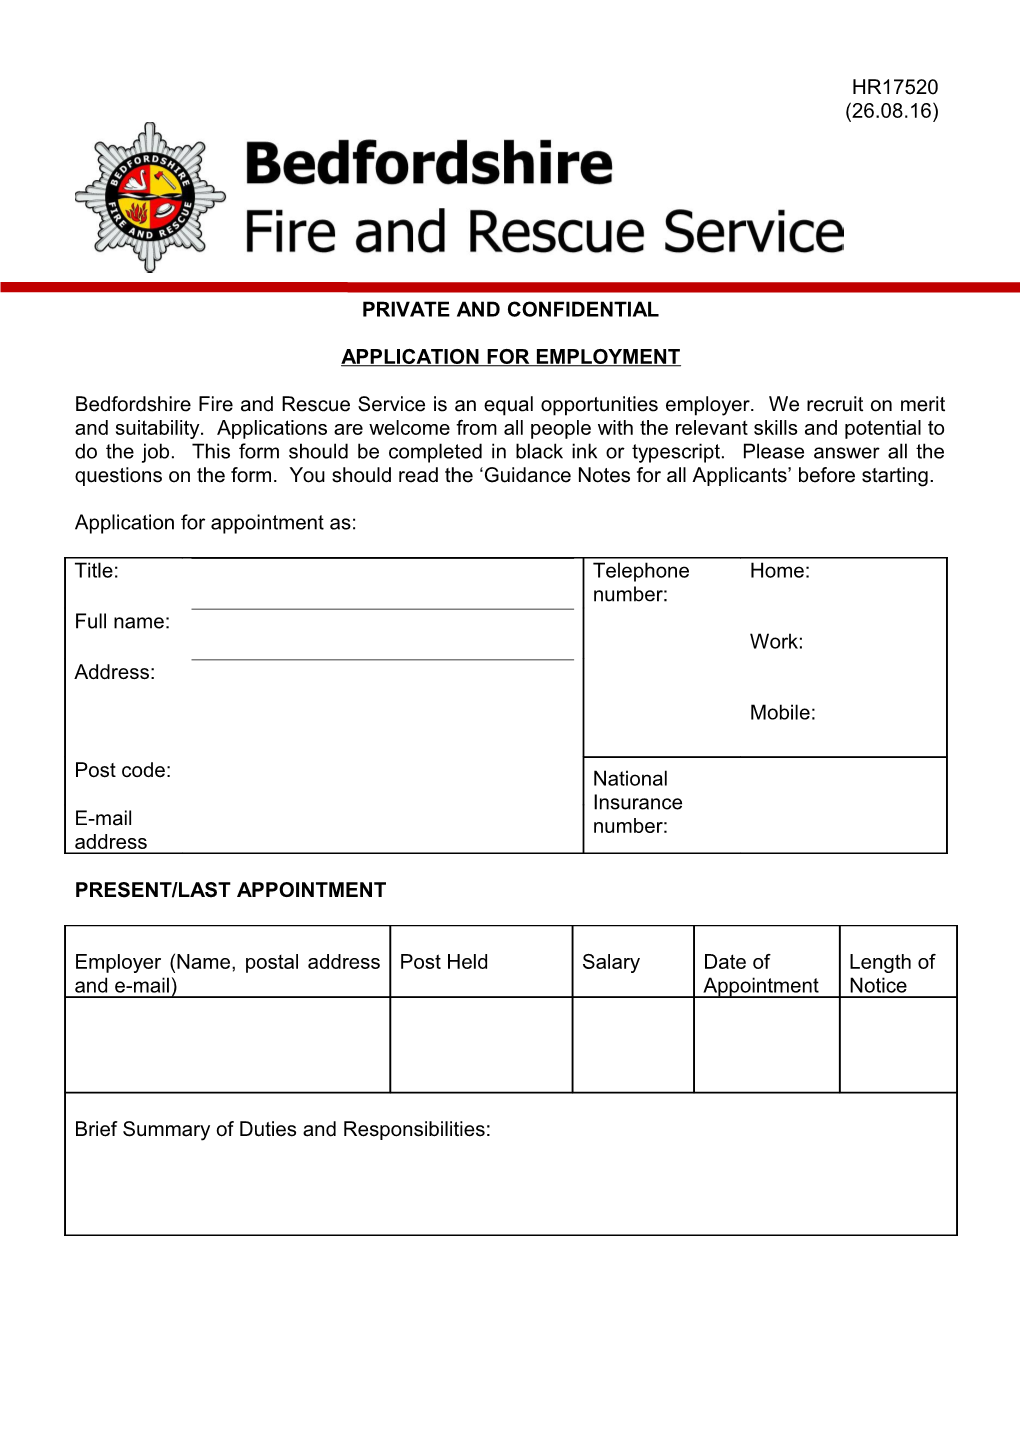 Application Form, Essential Criteria and Monitoring Form